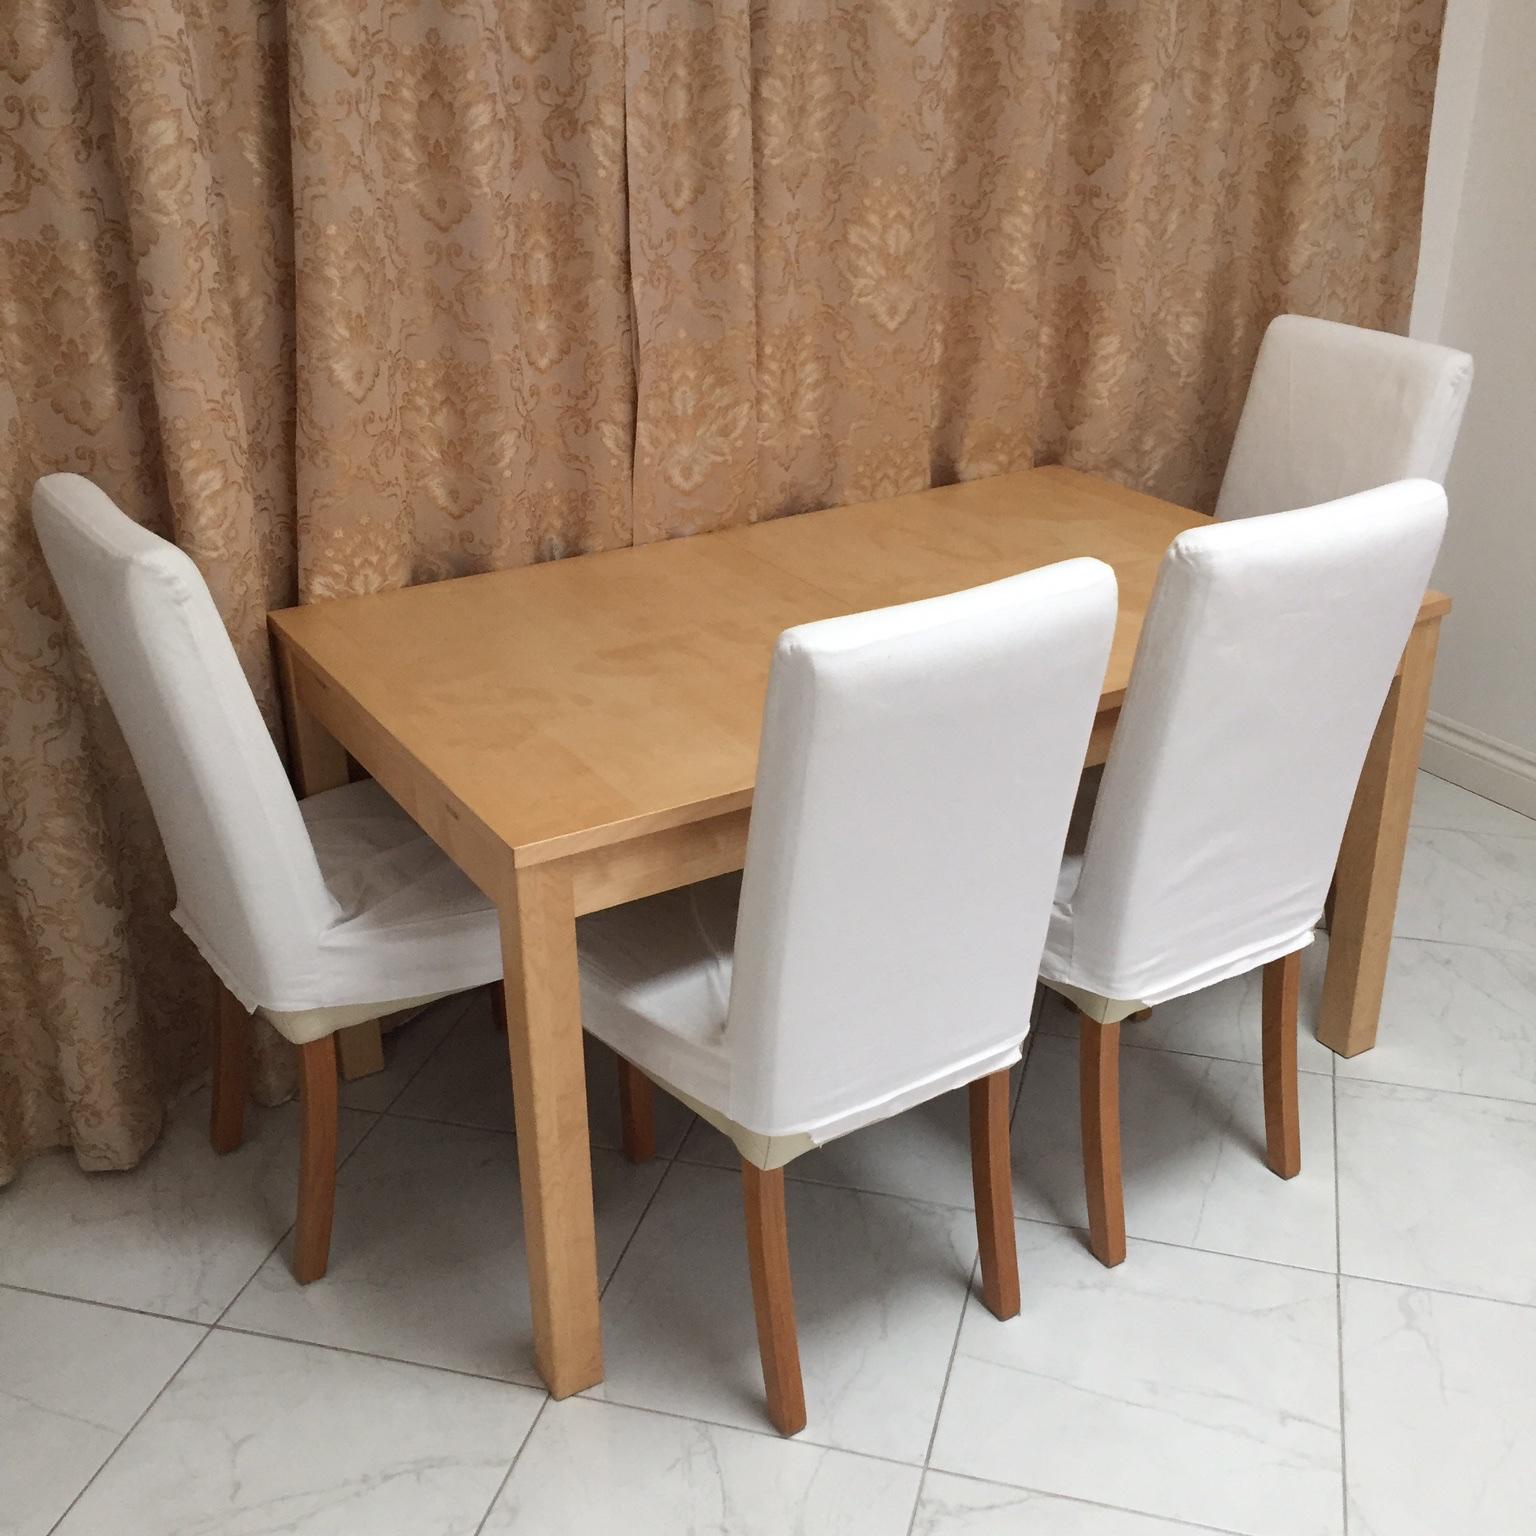 Ikea Dining Table And Six Chairs Set In, Dining Table Chairs Set Of 6 Ikea